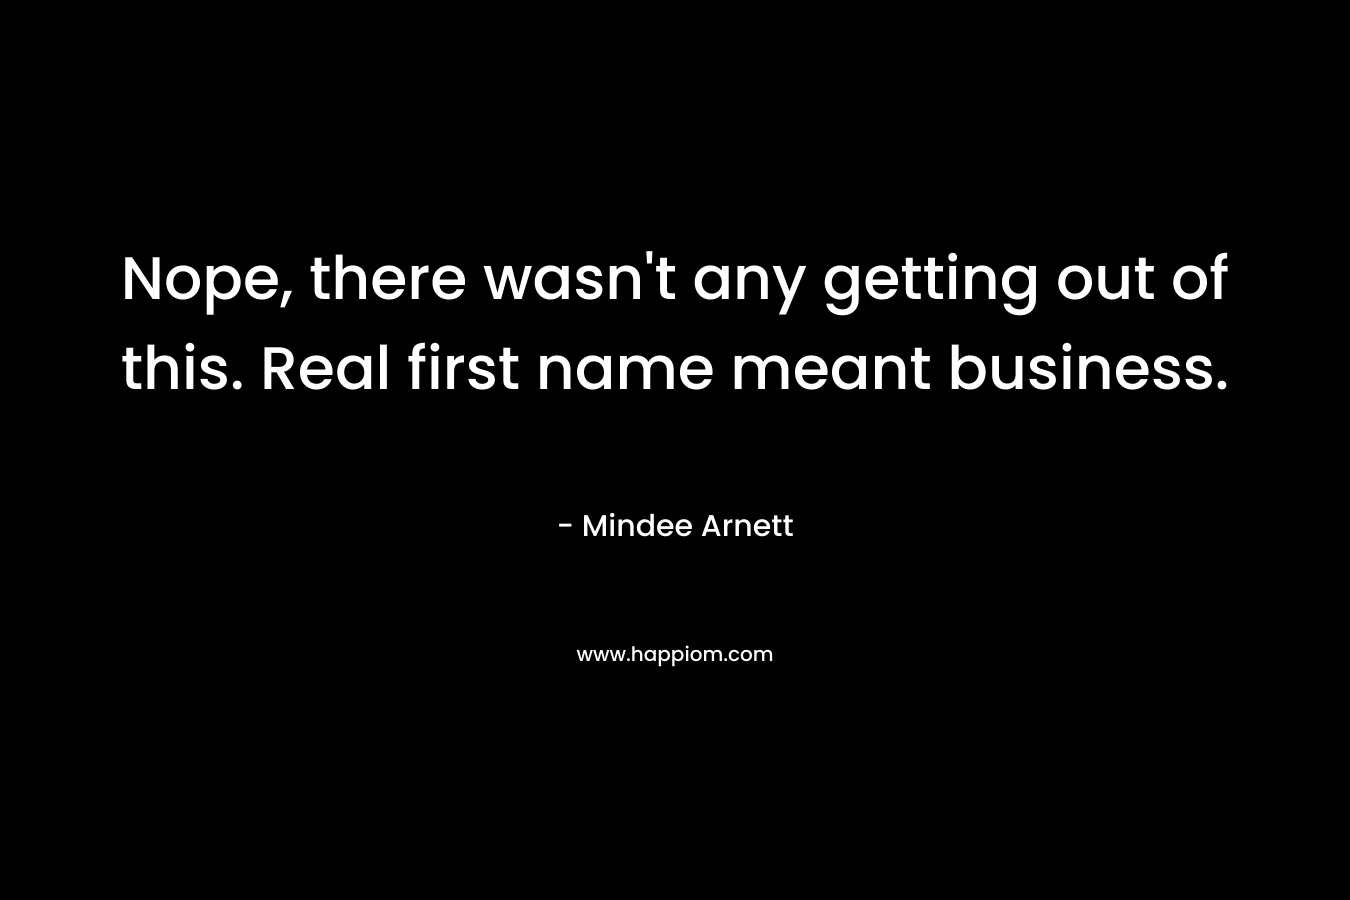 Nope, there wasn’t any getting out of this. Real first name meant business. – Mindee Arnett